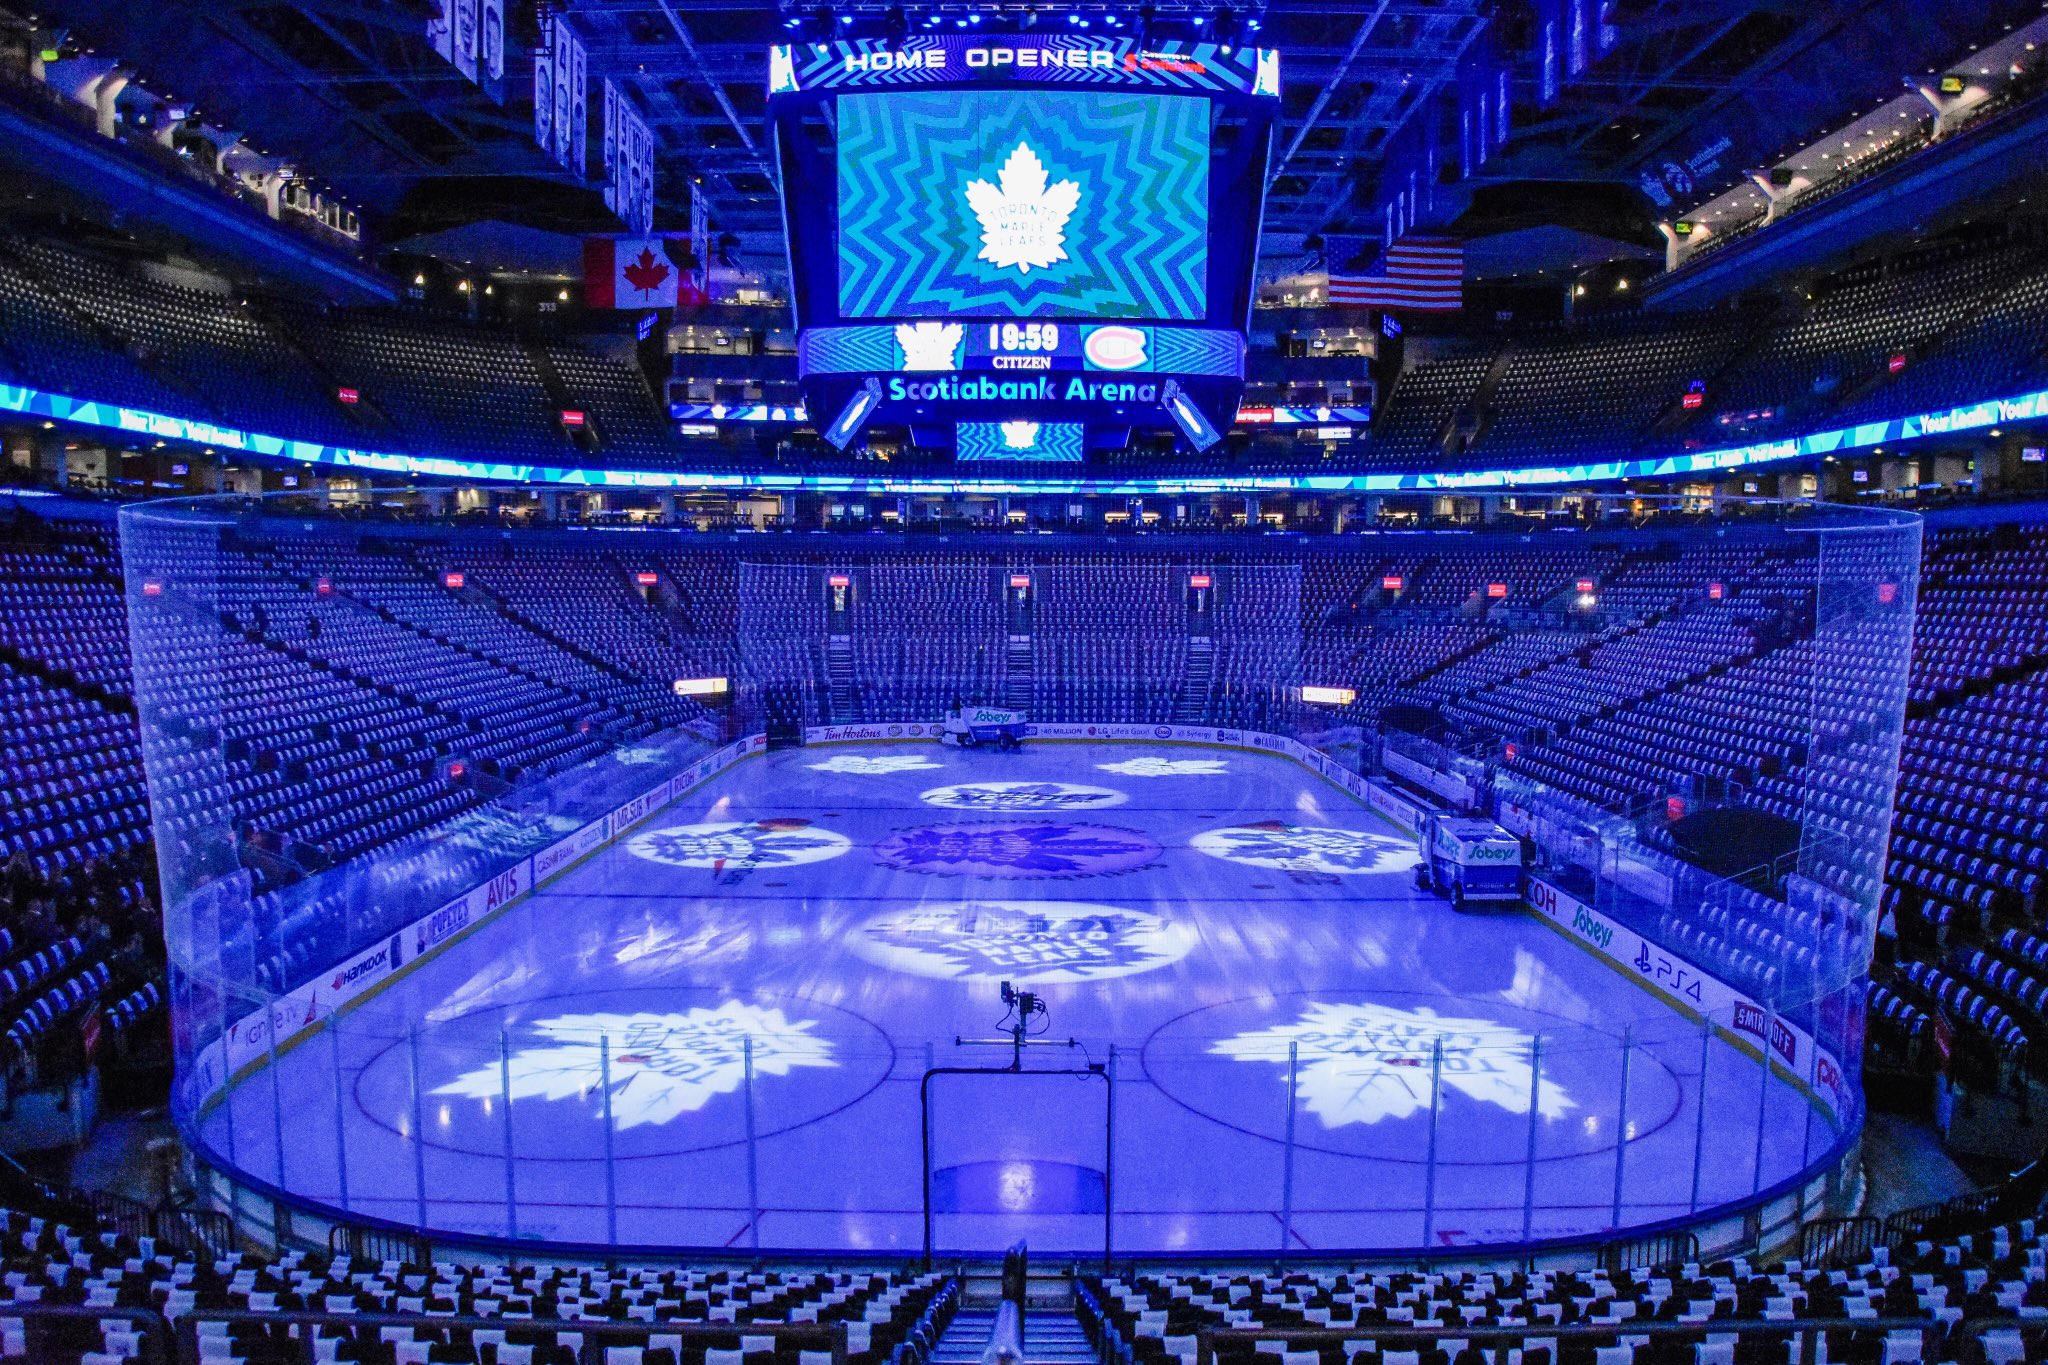 Toronto Maple Leafs Official Store & Scotia Bank Arena! 